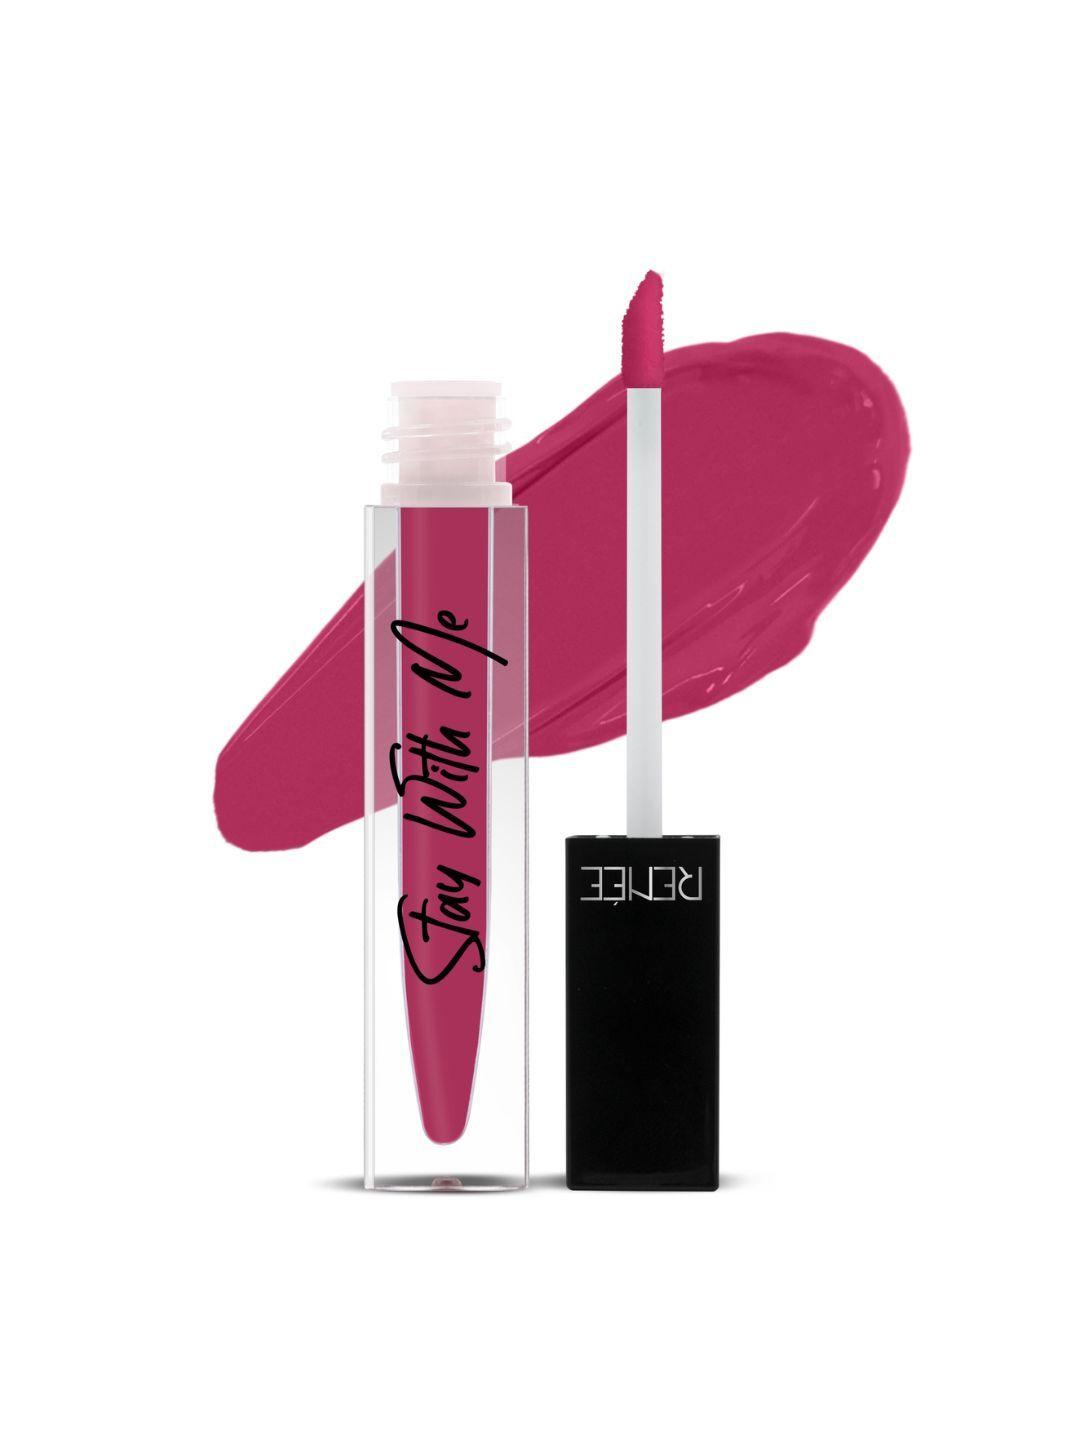 renee stay with me matte lip color - pride of magenta 5ml